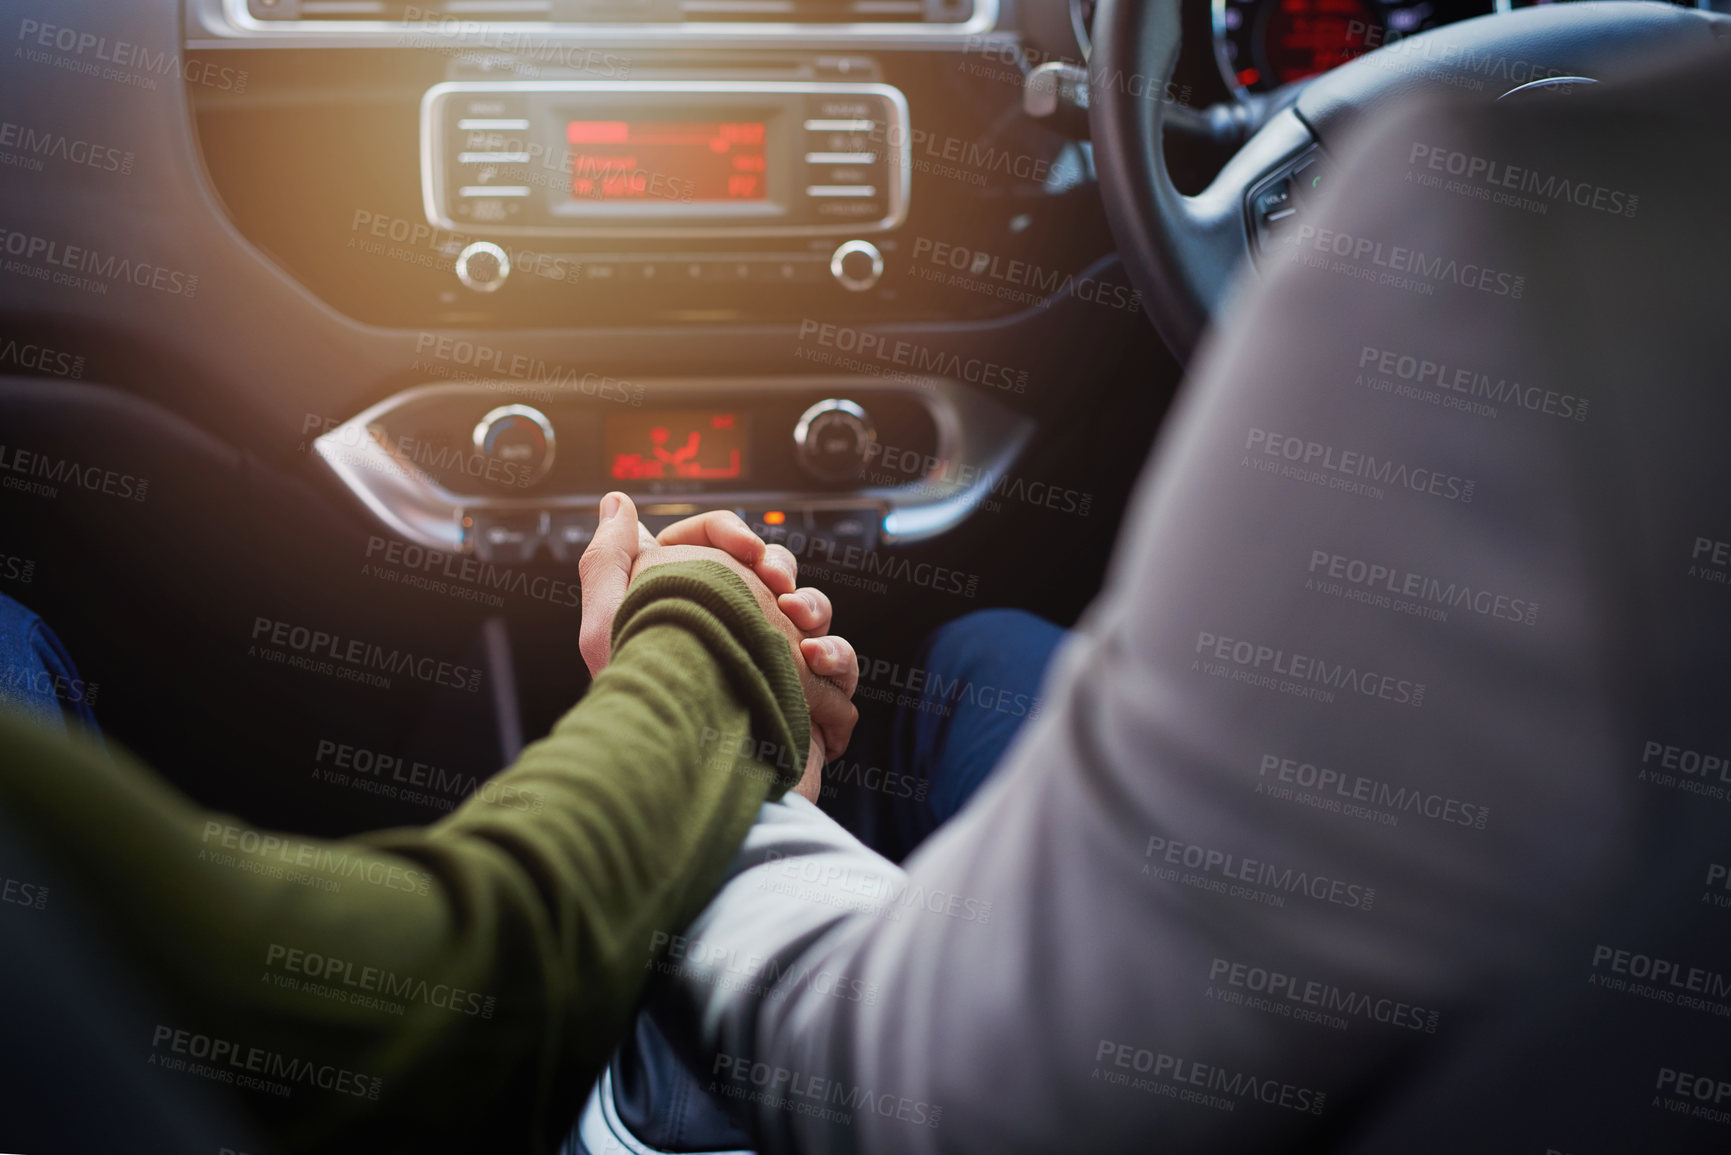 Buy stock photo Closeup shot of a couple holding hands while driving in a car